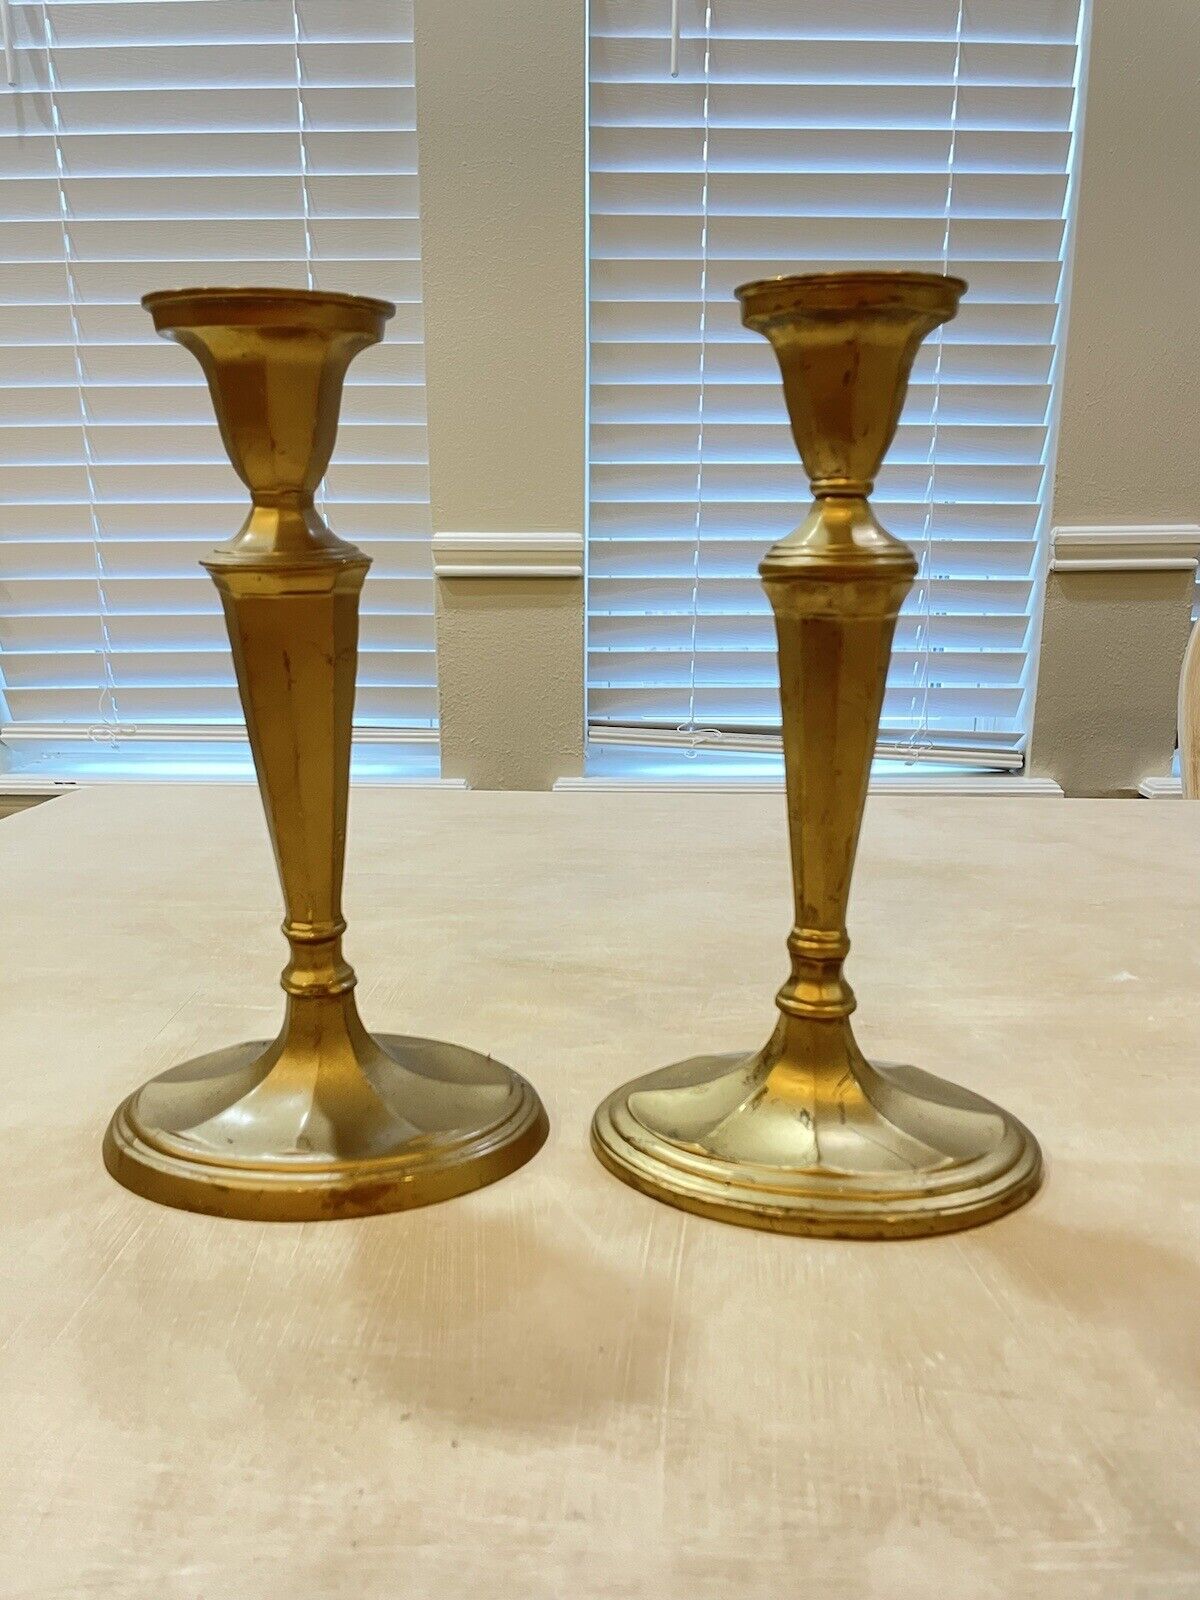 Pair of Two Gold Candlestick Holders - Painted, 11 Inches Tall